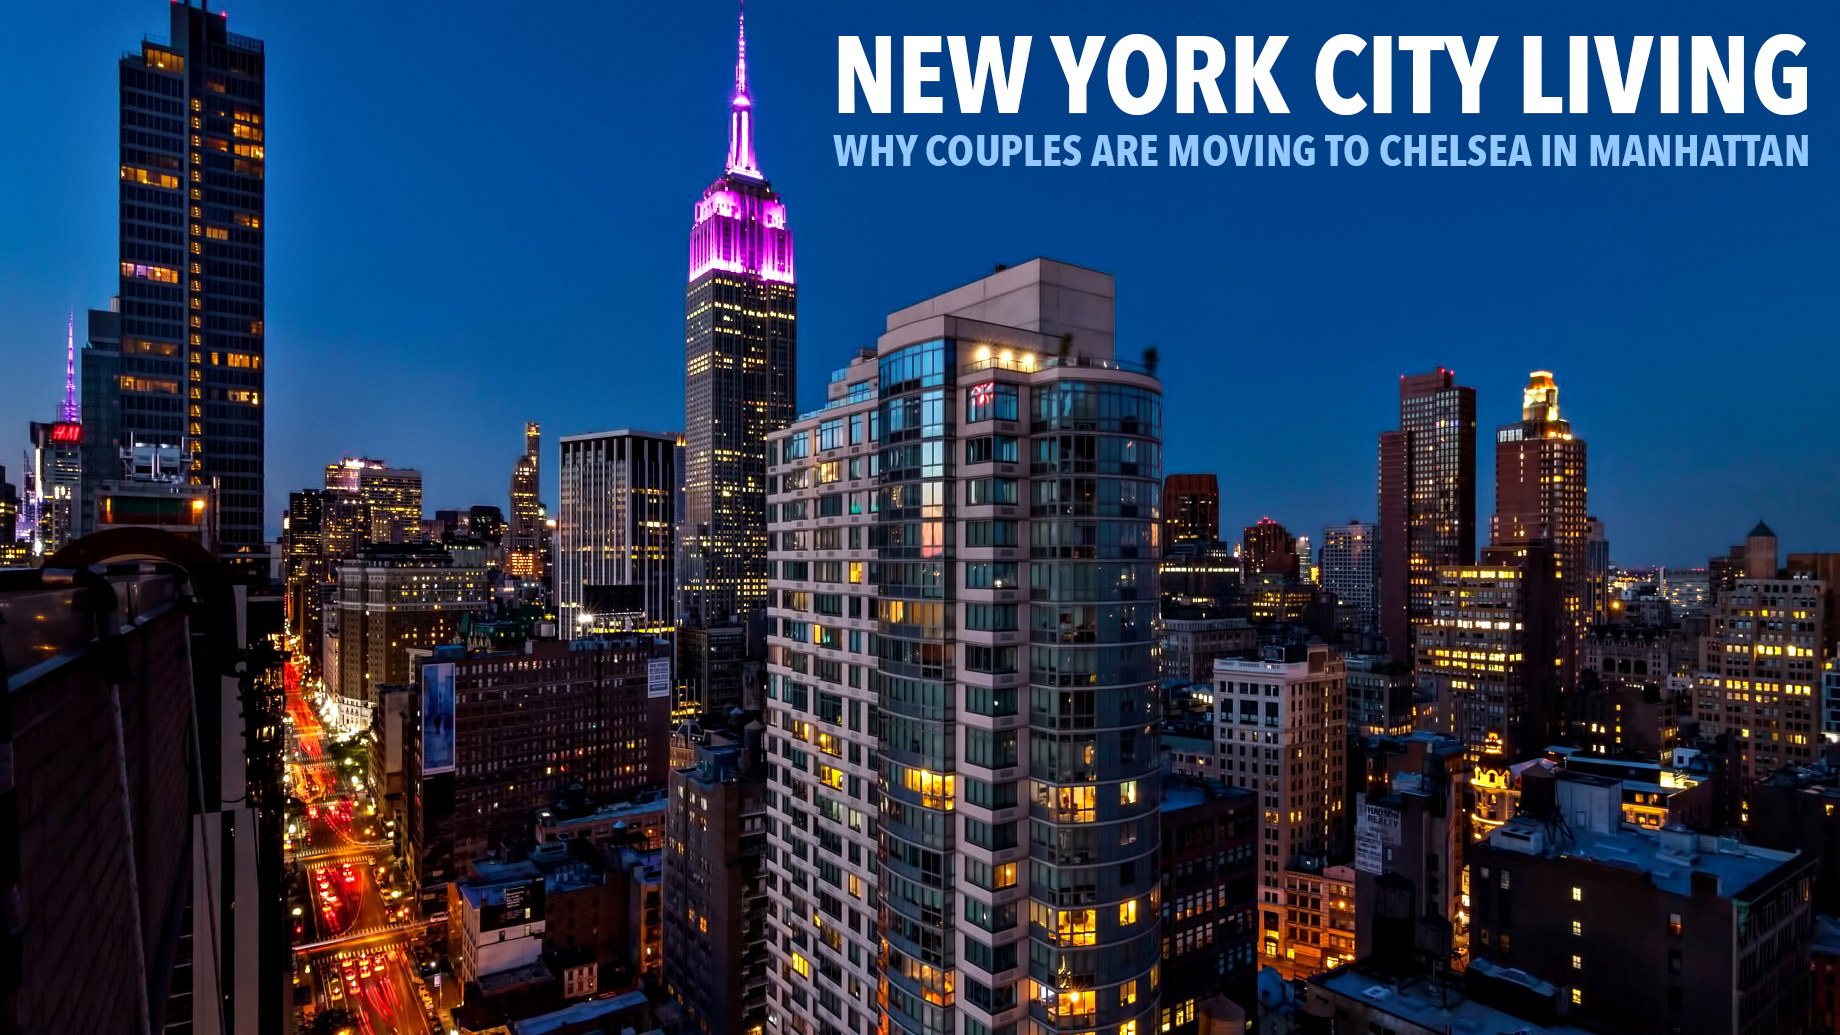 New York City Living - Why Couples Are Moving to Chelsea in Manhattan